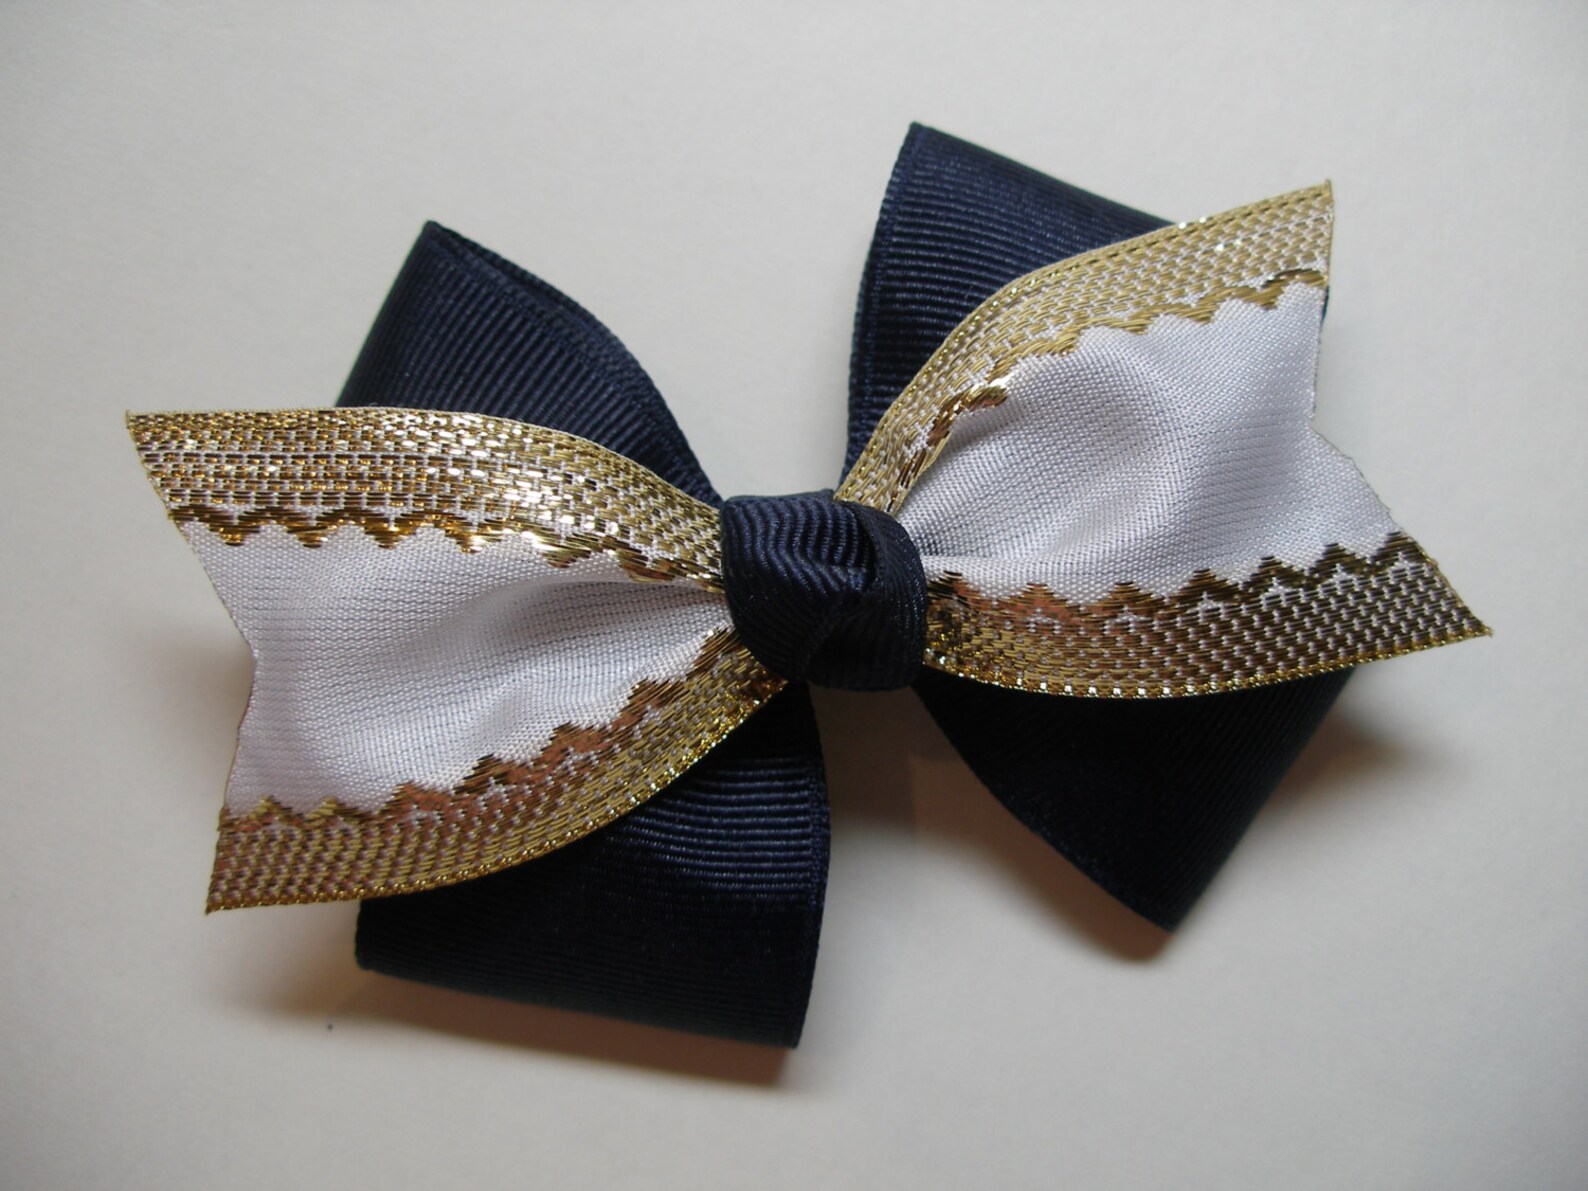 2. Handmade Royal Blue and Gold Hair Bow - wide 8